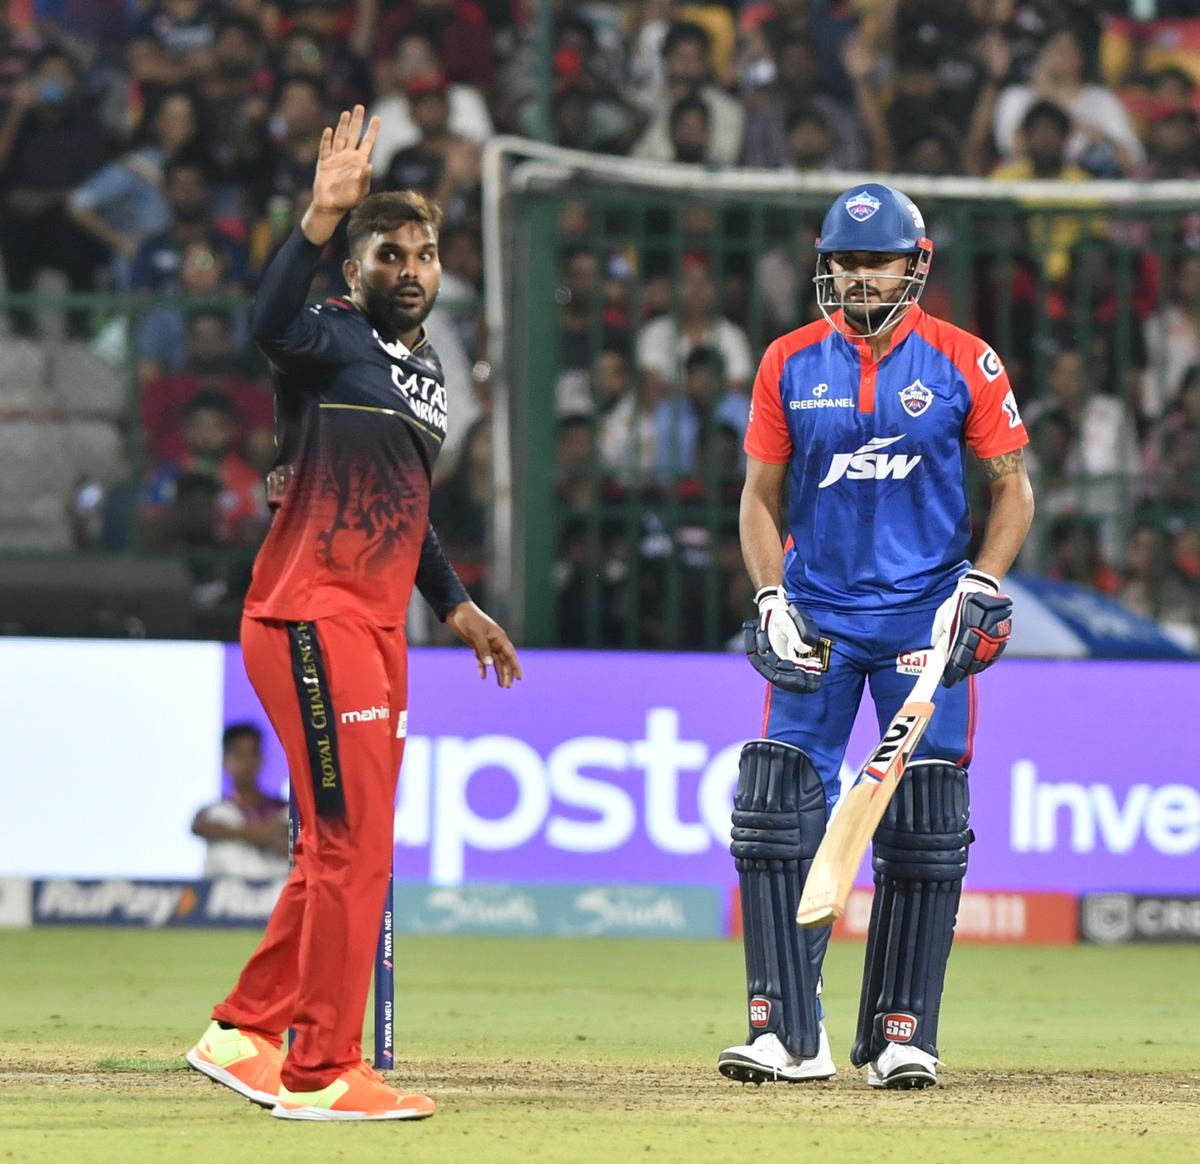 Hasaranga appeals successfully for lbw against Manish Pandey during the TATA IPL 2023 between Royal Challengers and Delhi Capitals at the M. Chinnaswamy stadium in Bengaluru  on April 15, 2023.